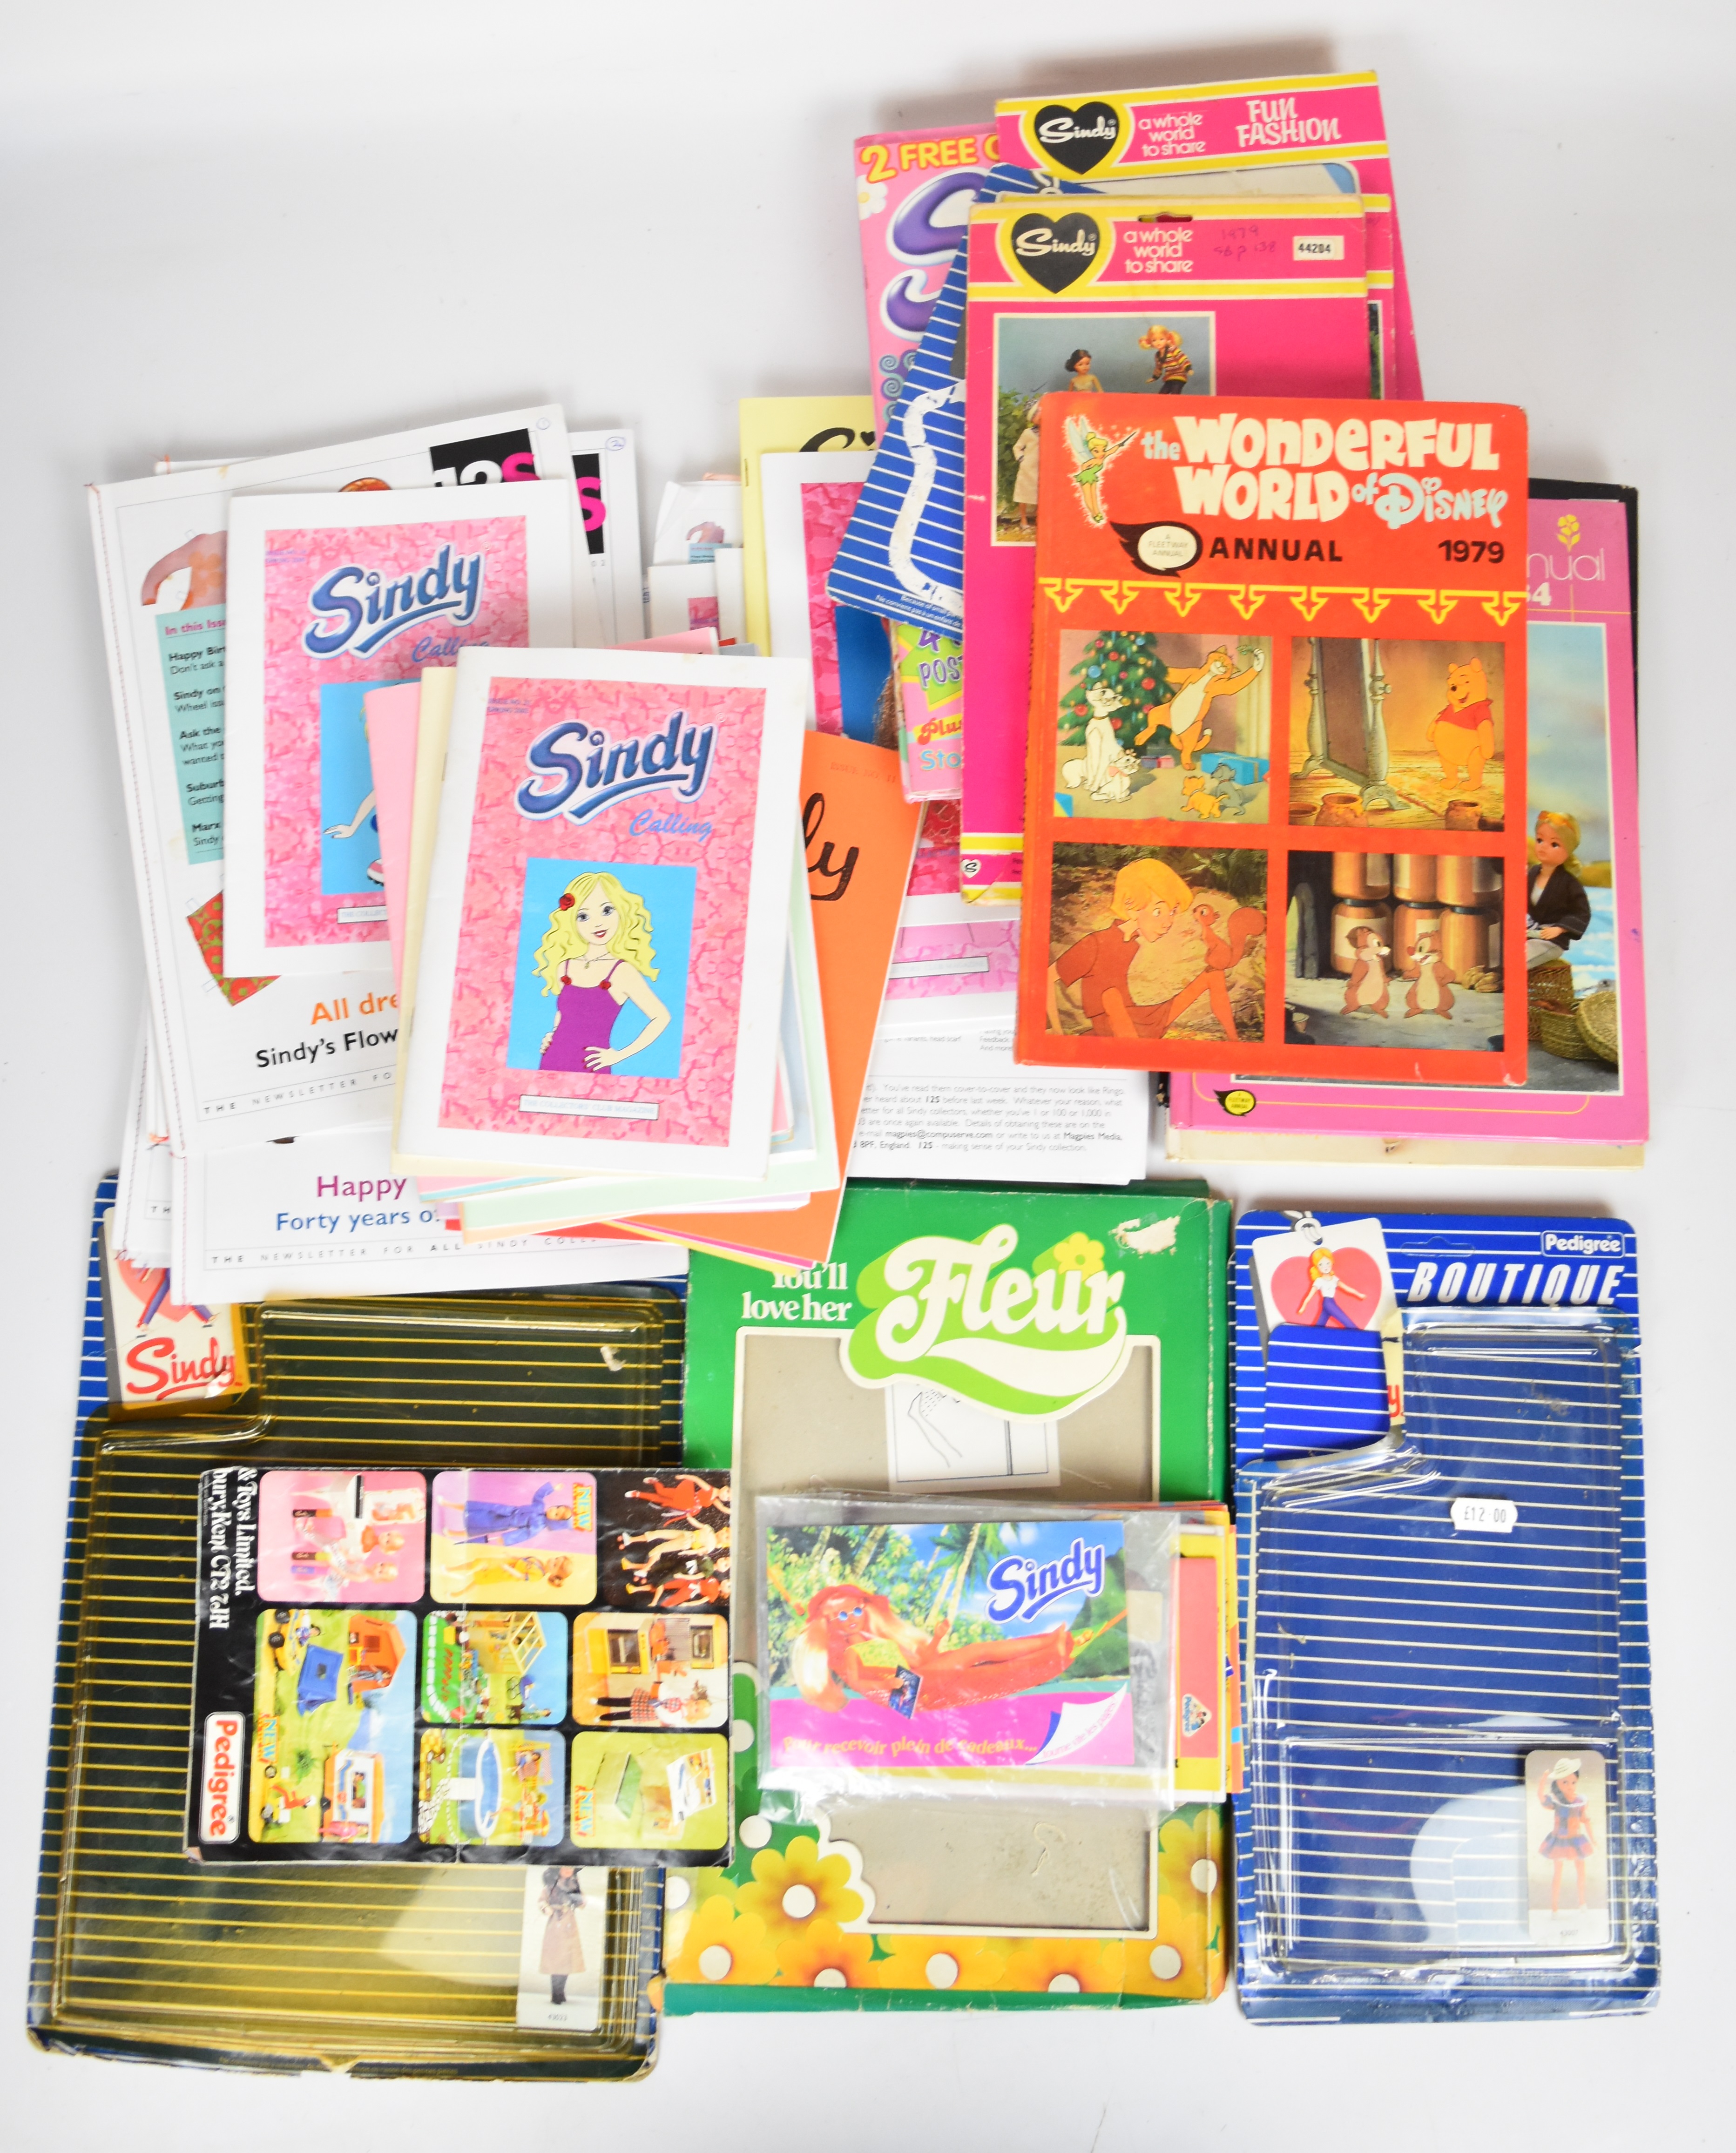 A collection of Sindy related items including fanzine issues, annuals and original Pedigree outfit